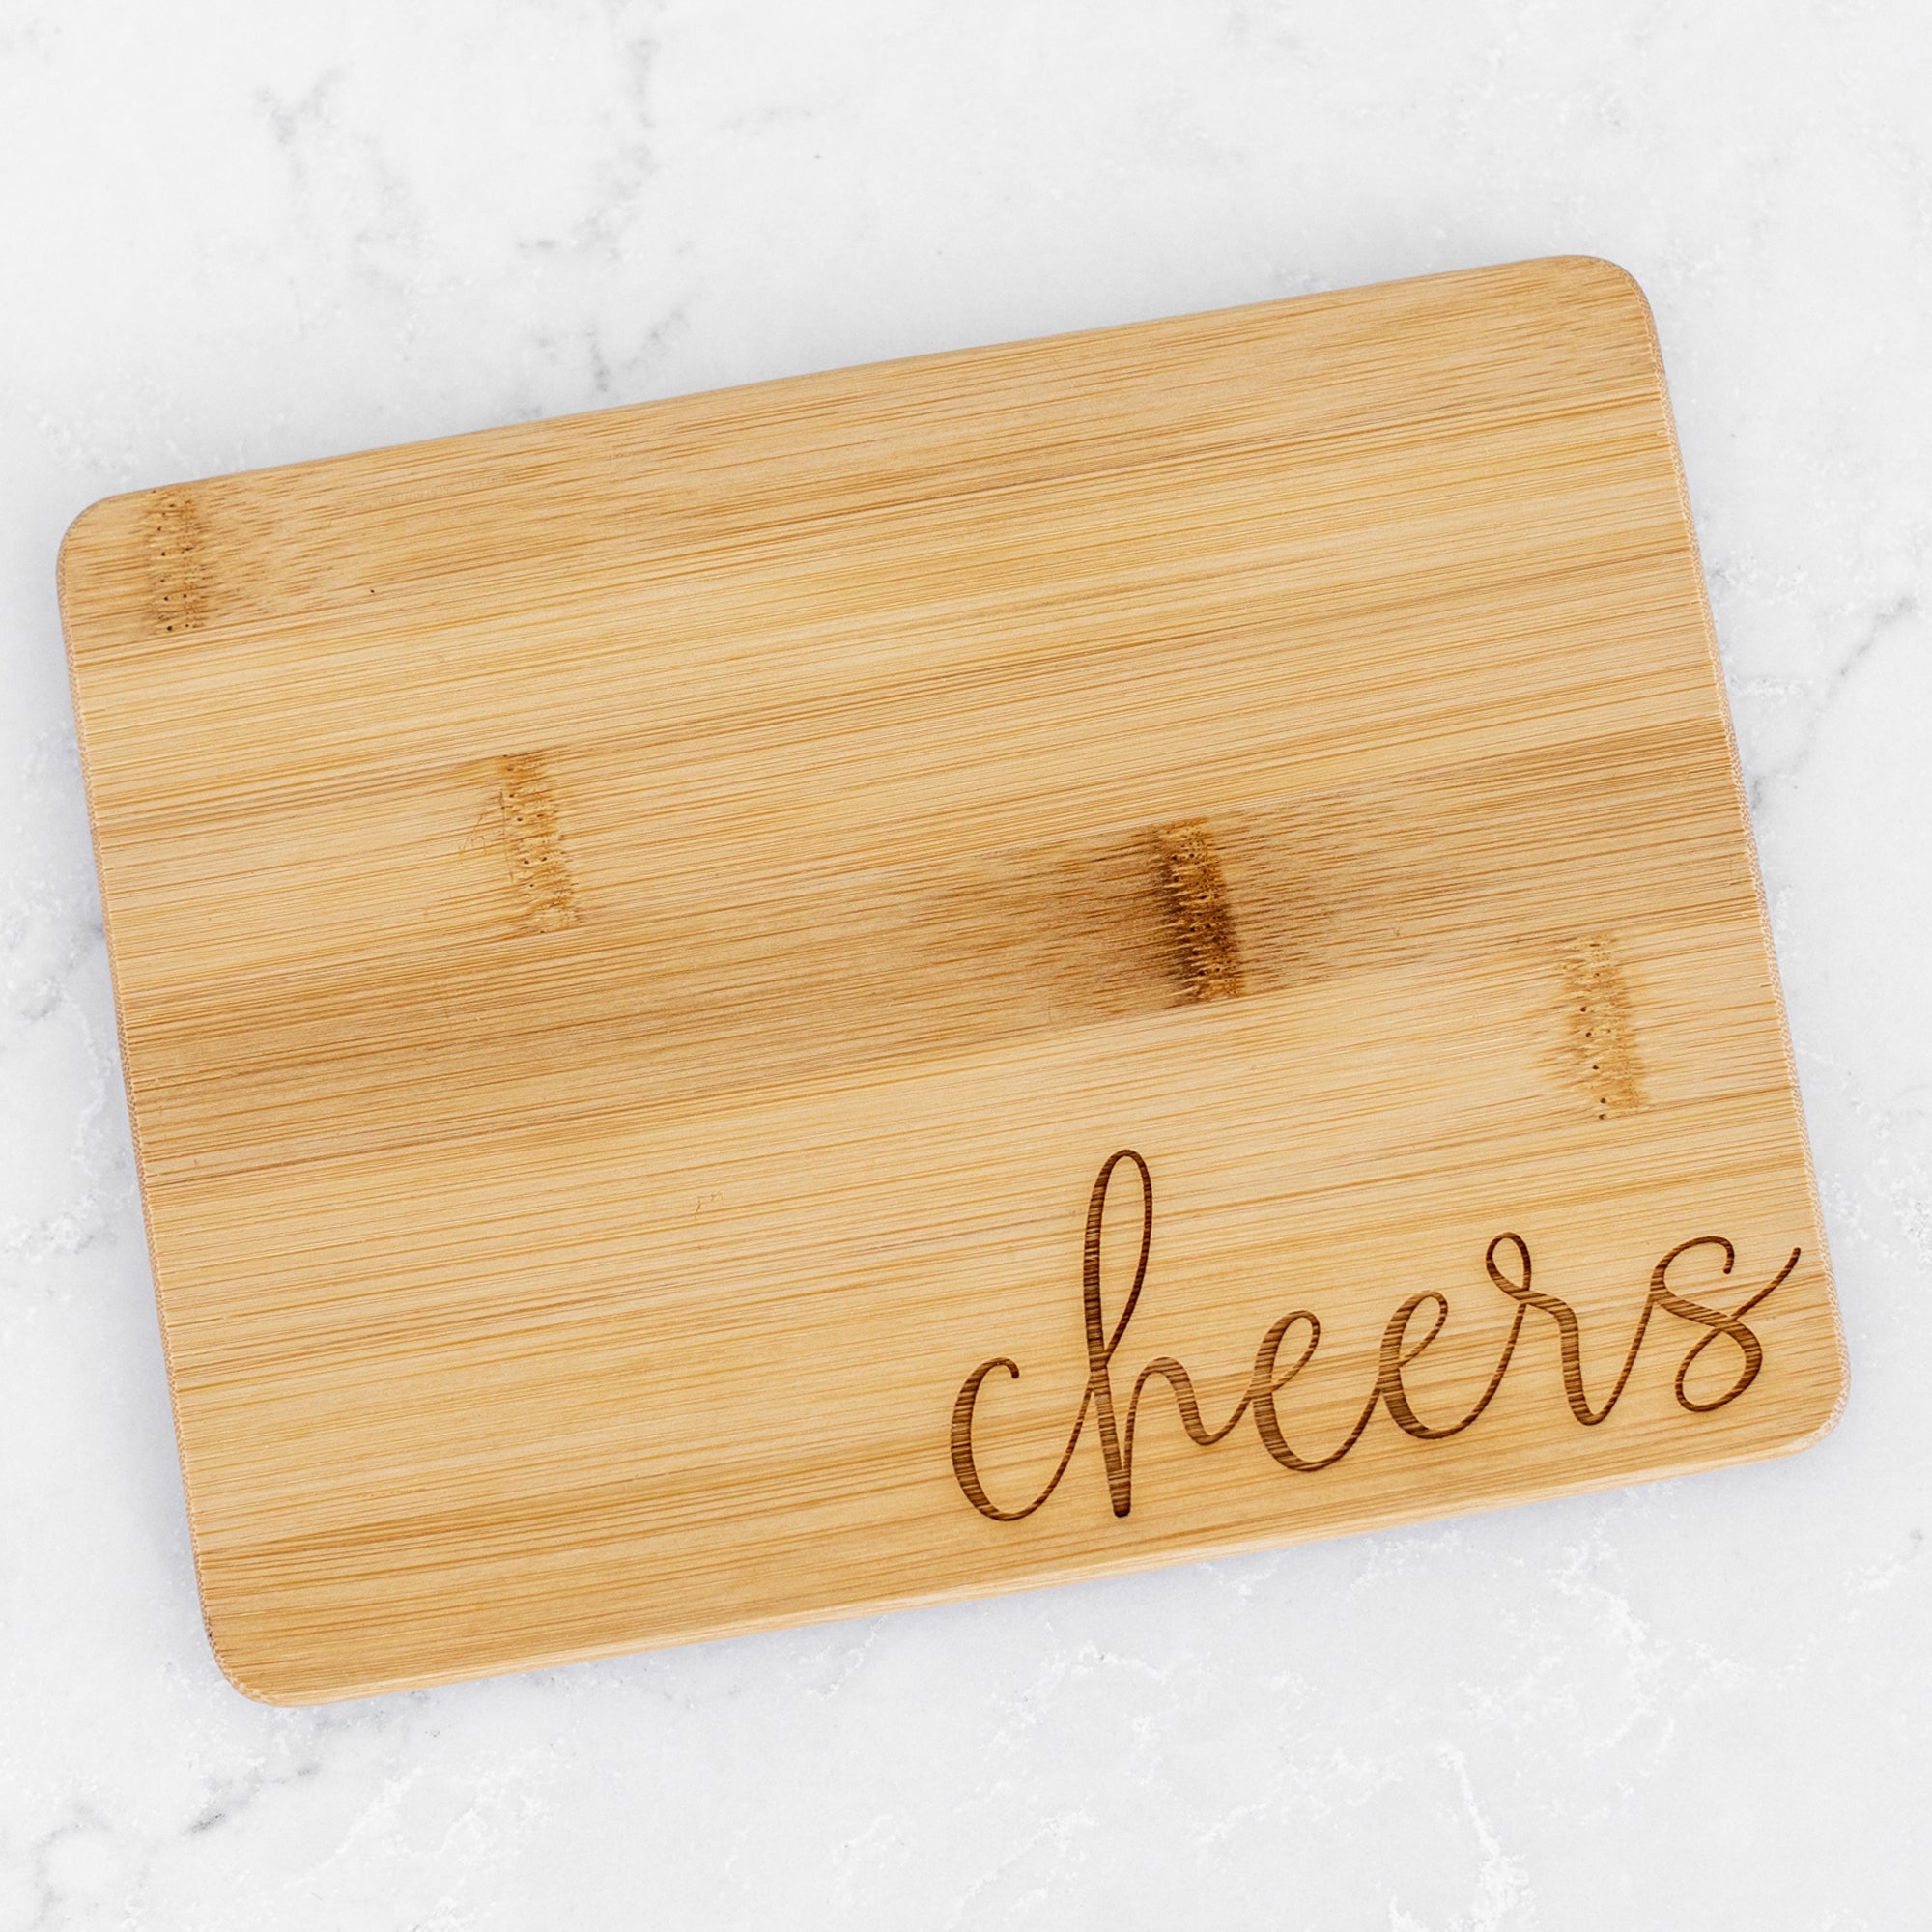 Personalized "Cheers" Bar Board & Bottle Opener Gift Set - Raise a Glass